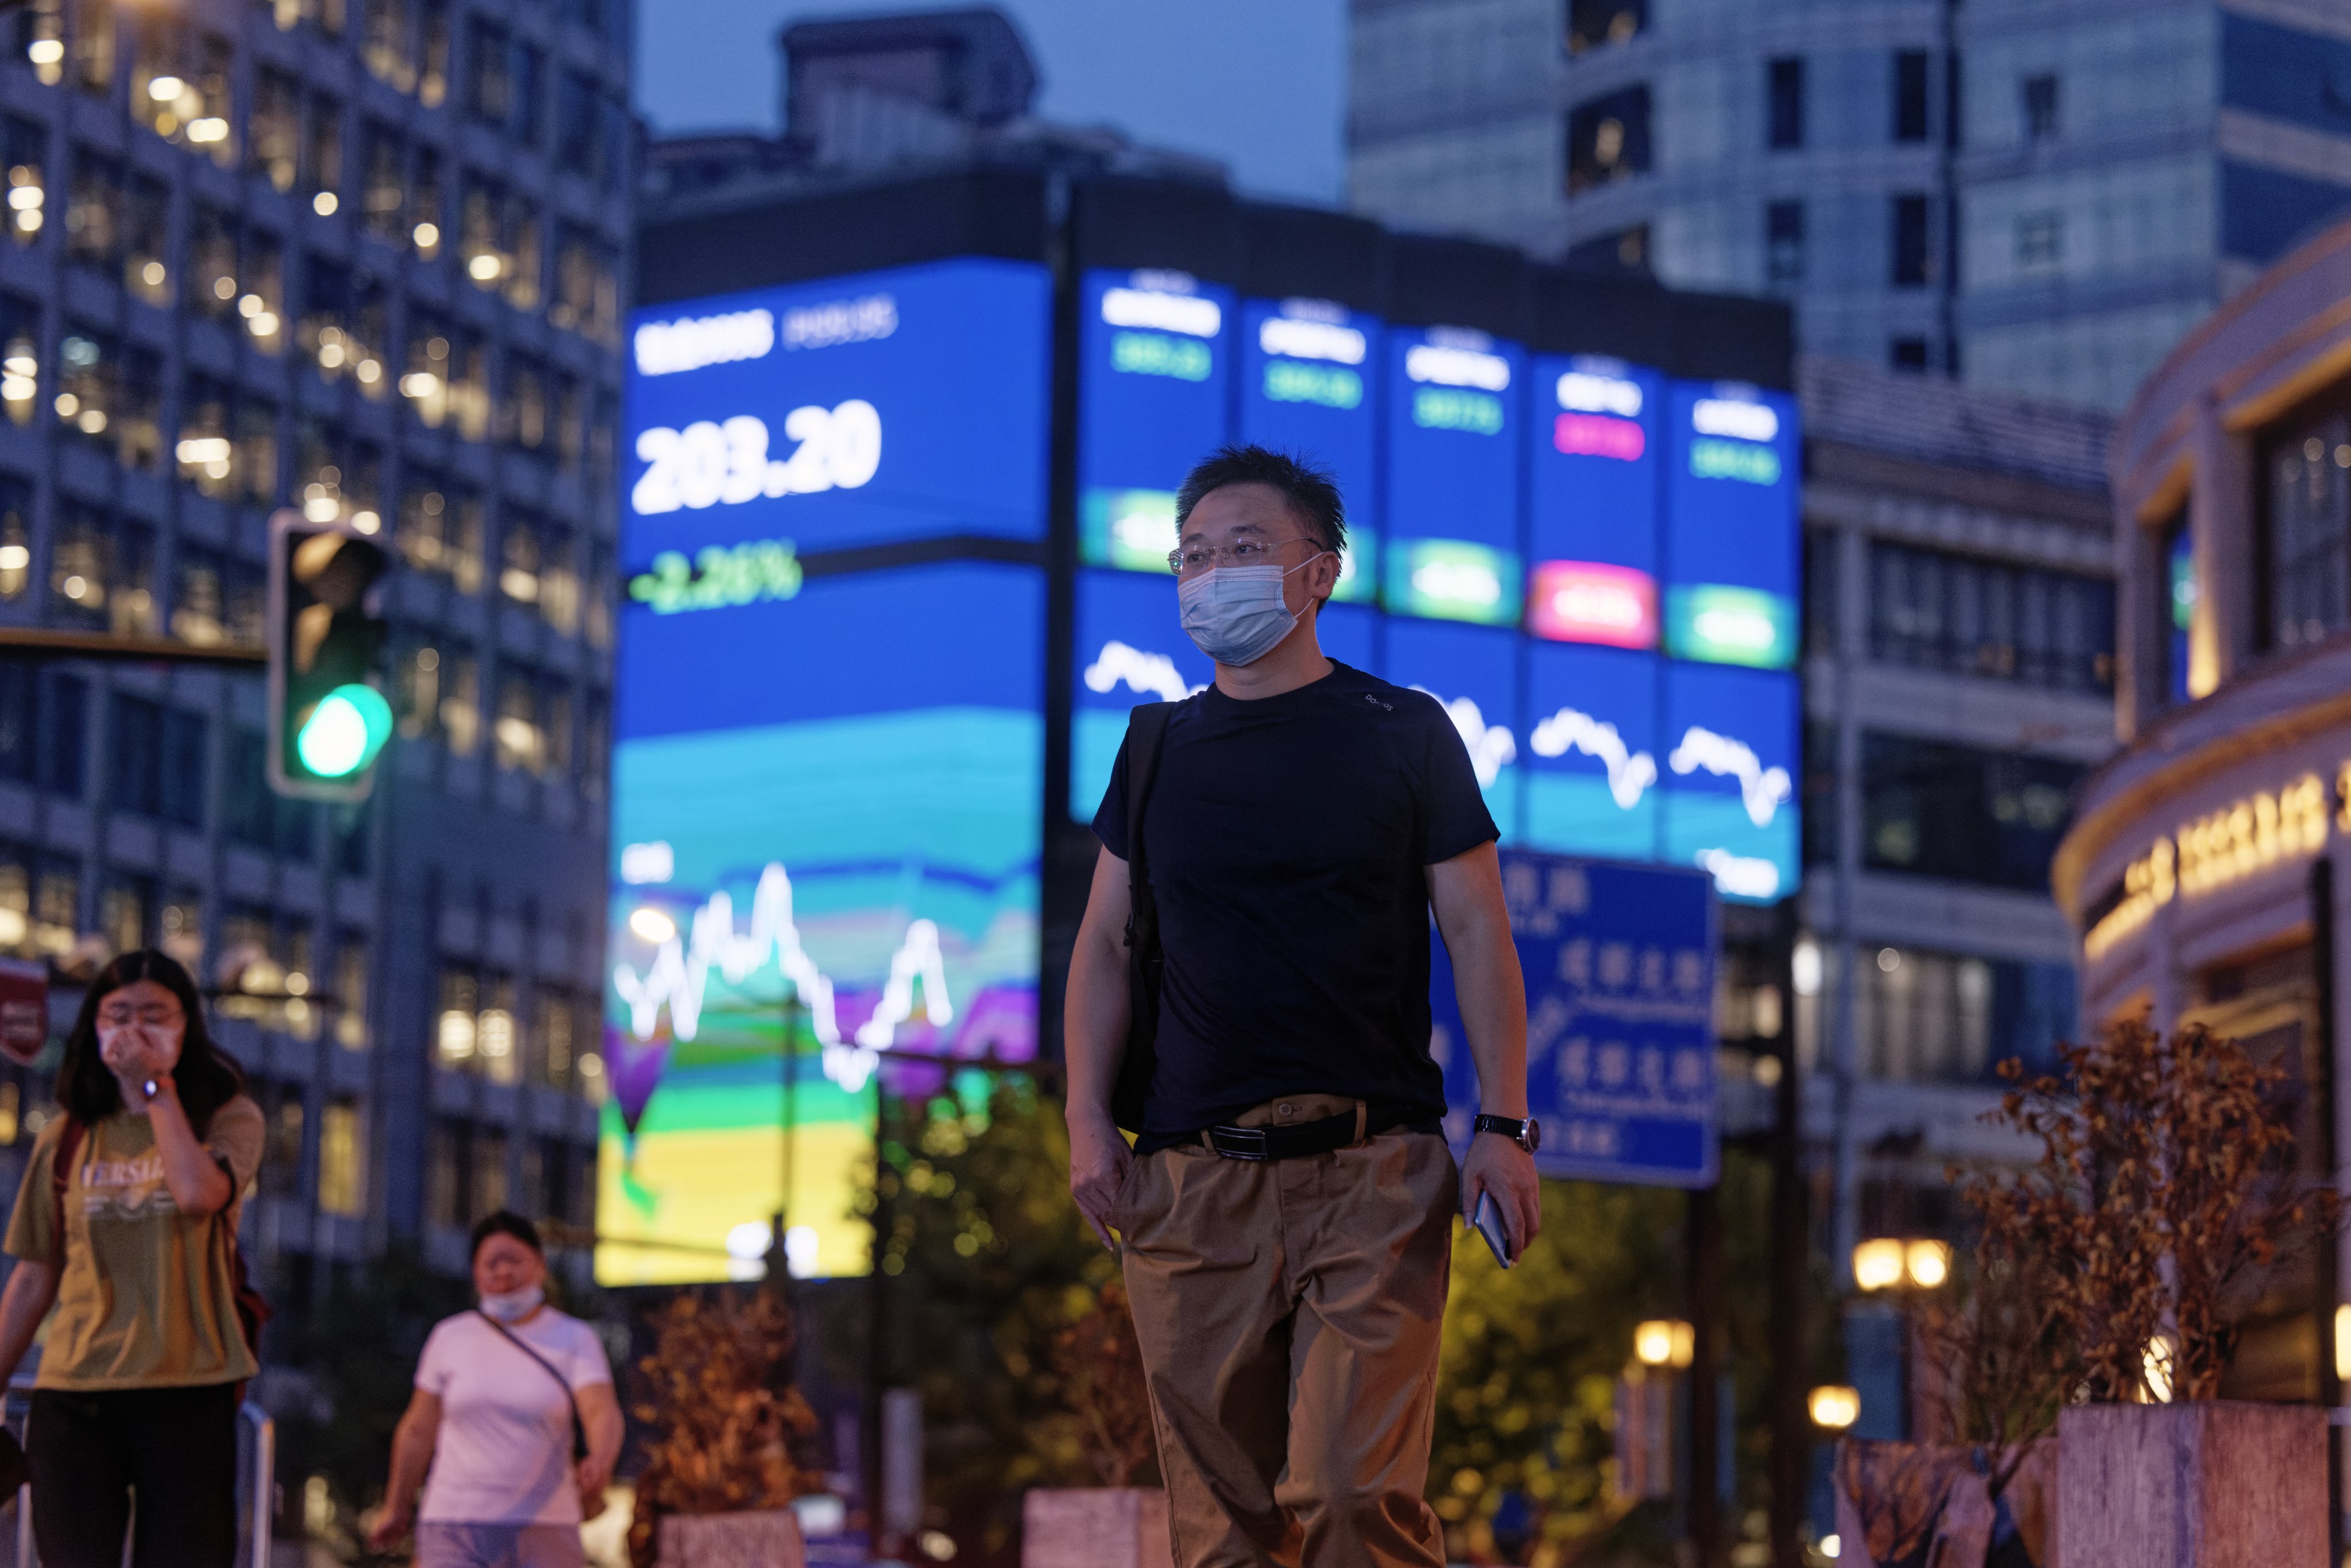 People walk in front of a screen showing stock exchange data in Shanghai. Traders are carefully weighing their moves amid China’s ongoing power crisis. Photo: EPA-EFE